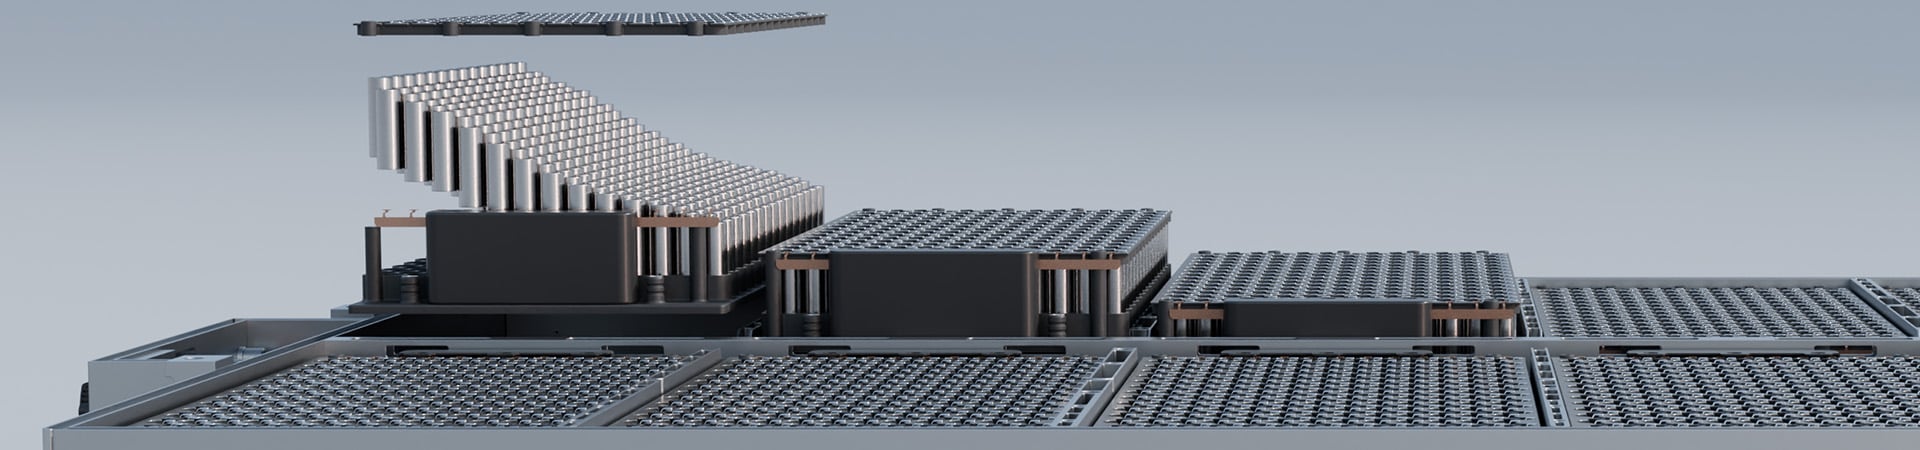 3D rendering of an exploded ev battery pack module against a grey background.